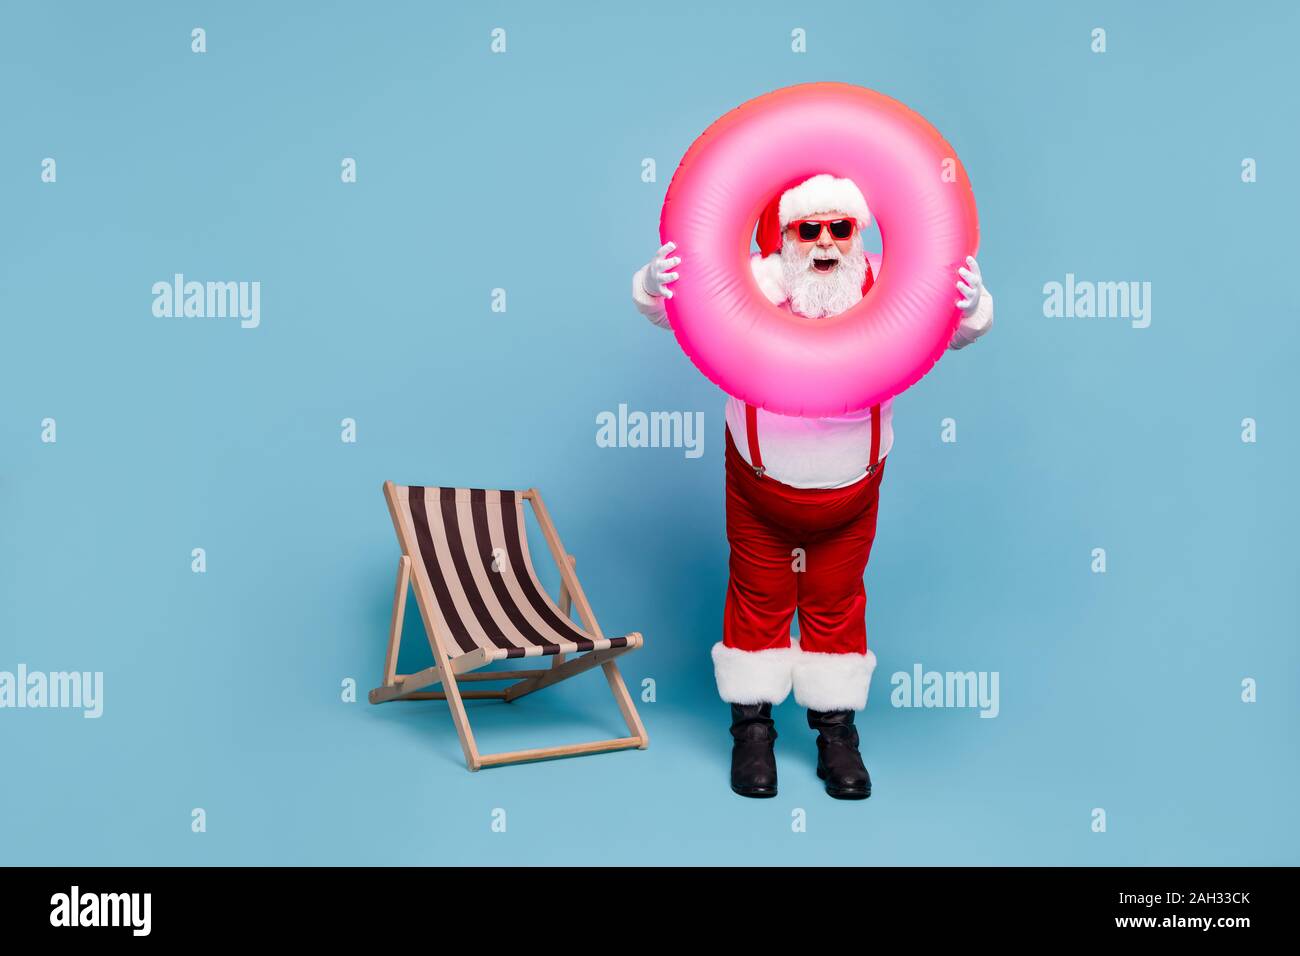 Full length body size view of his he nice cool comic glad cheerful cheery fat Santa carrying pink swimming circle having fun resort isolated over blue Stock Photo